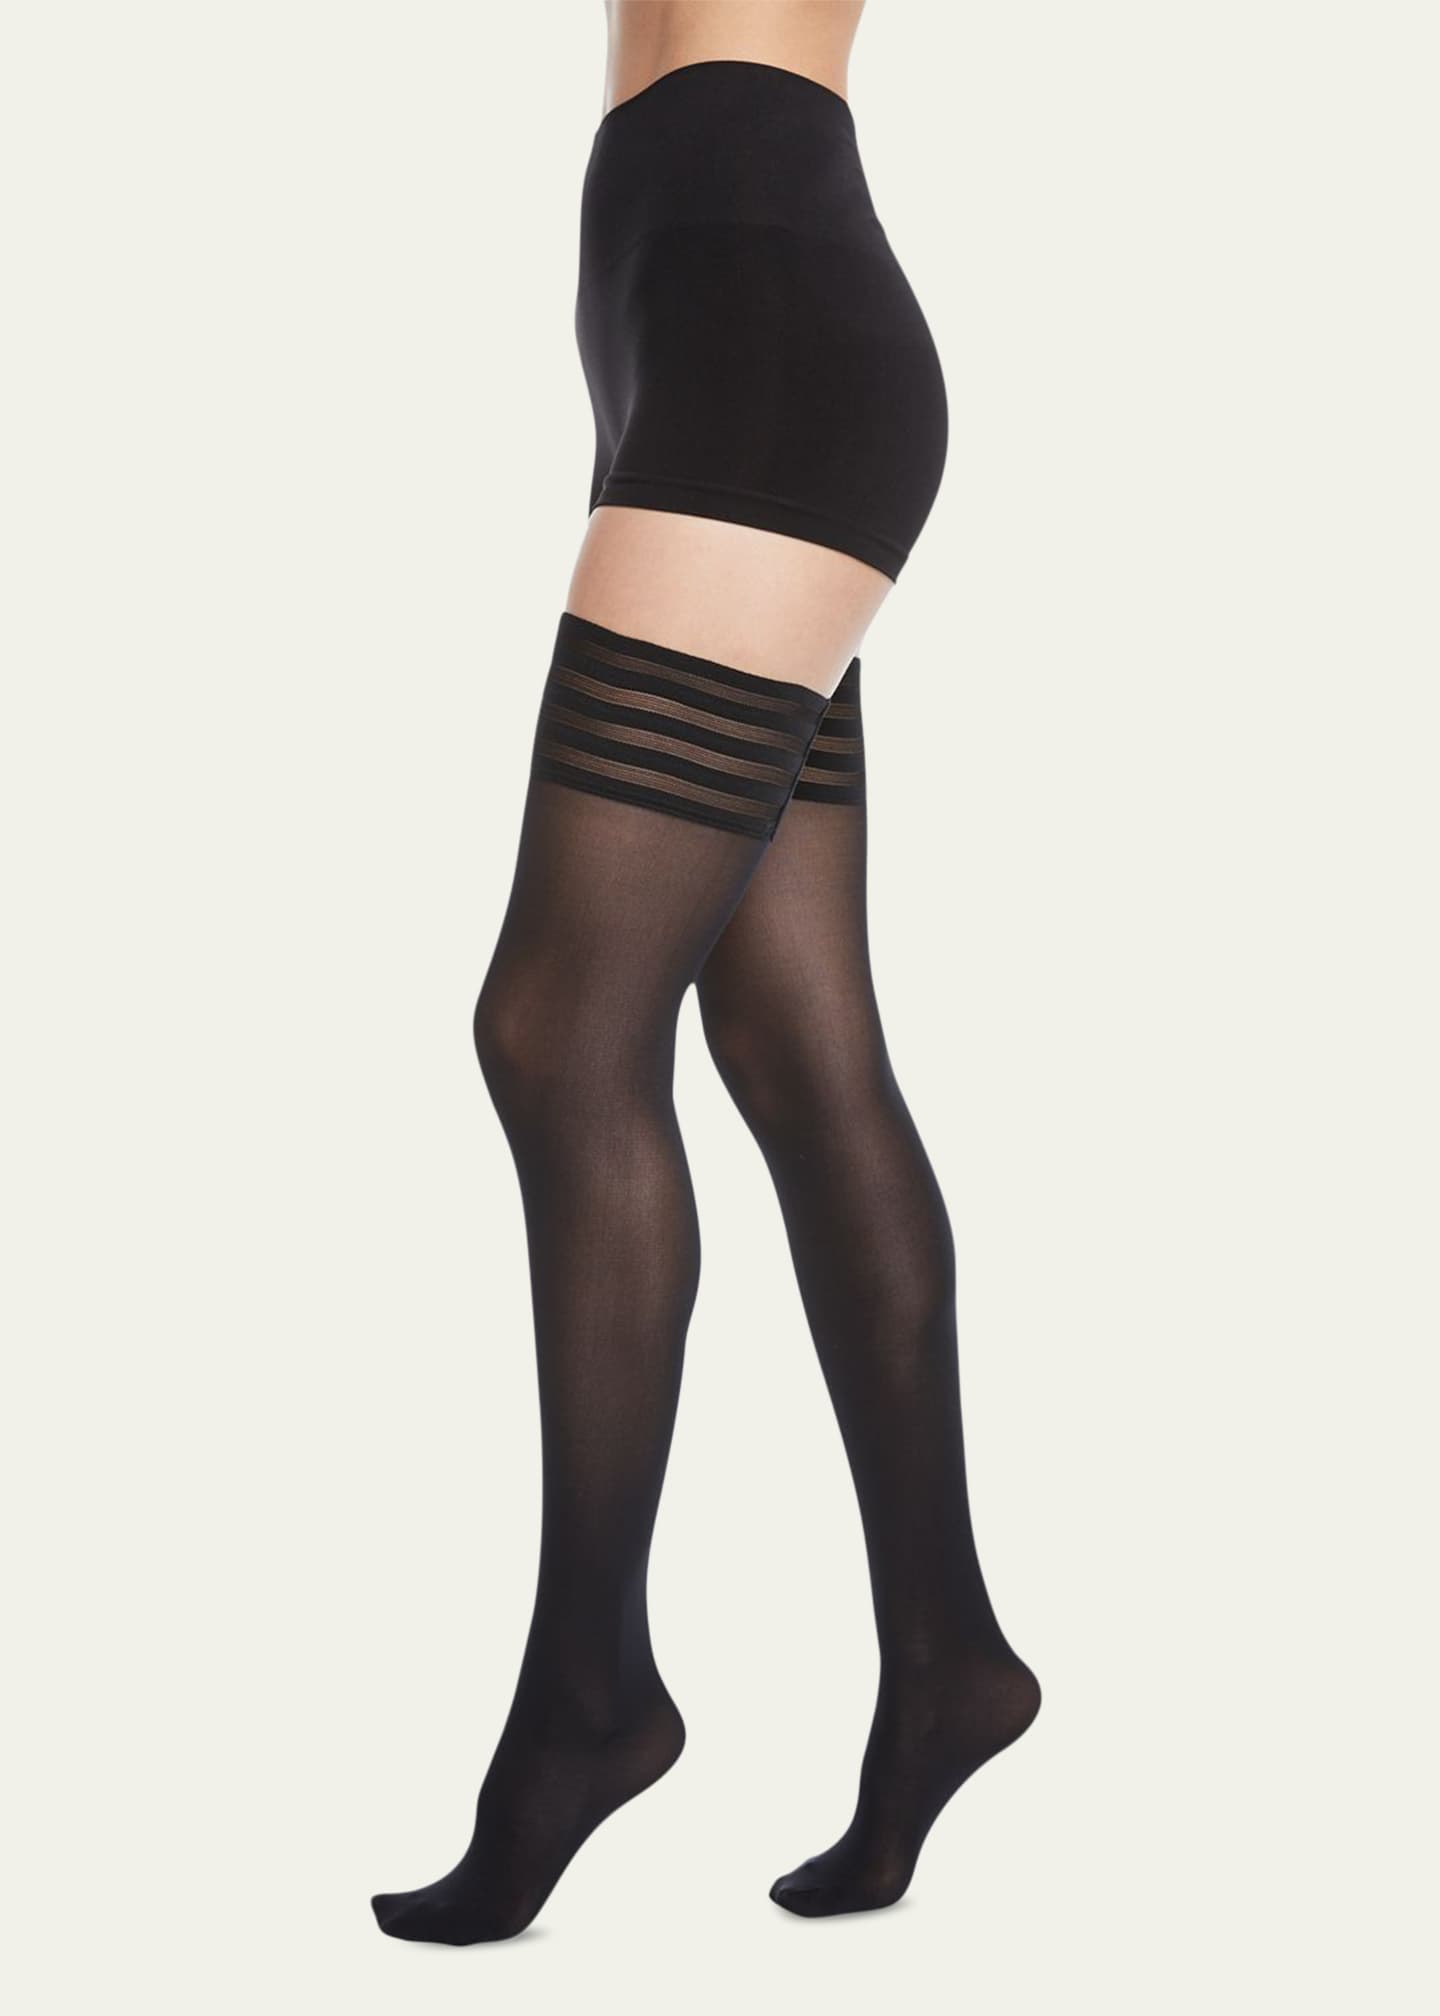 Wolford Velvet De Luxe Stay-Up Thigh Highs Stockings Image 2 of 2